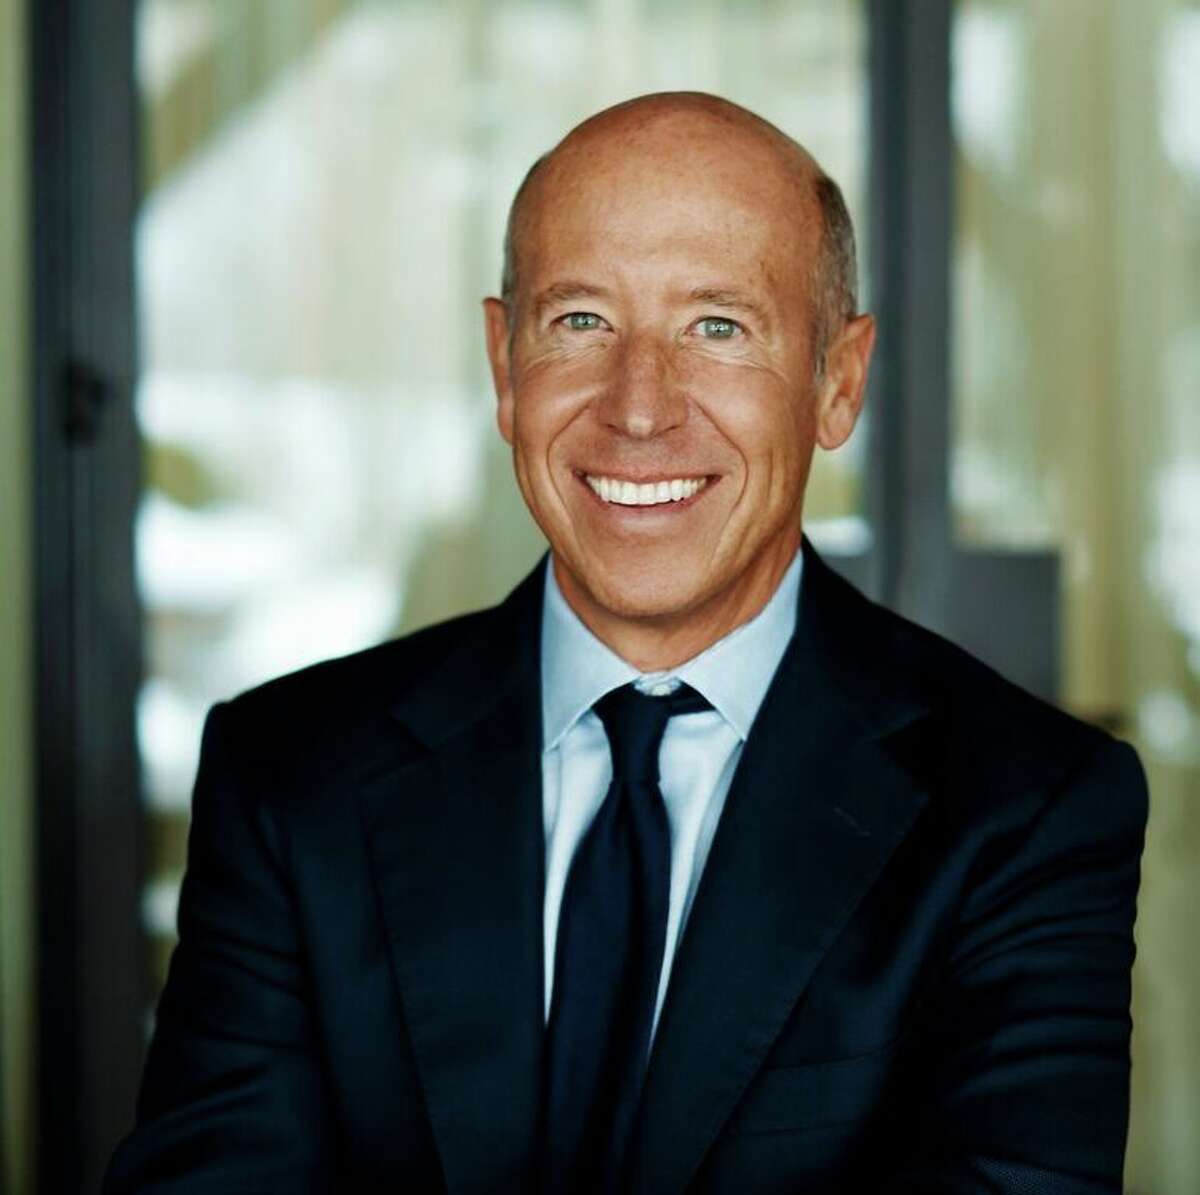 Barry S. Sternlicht, founder, chairman and CEO of Starwood Capital Group.